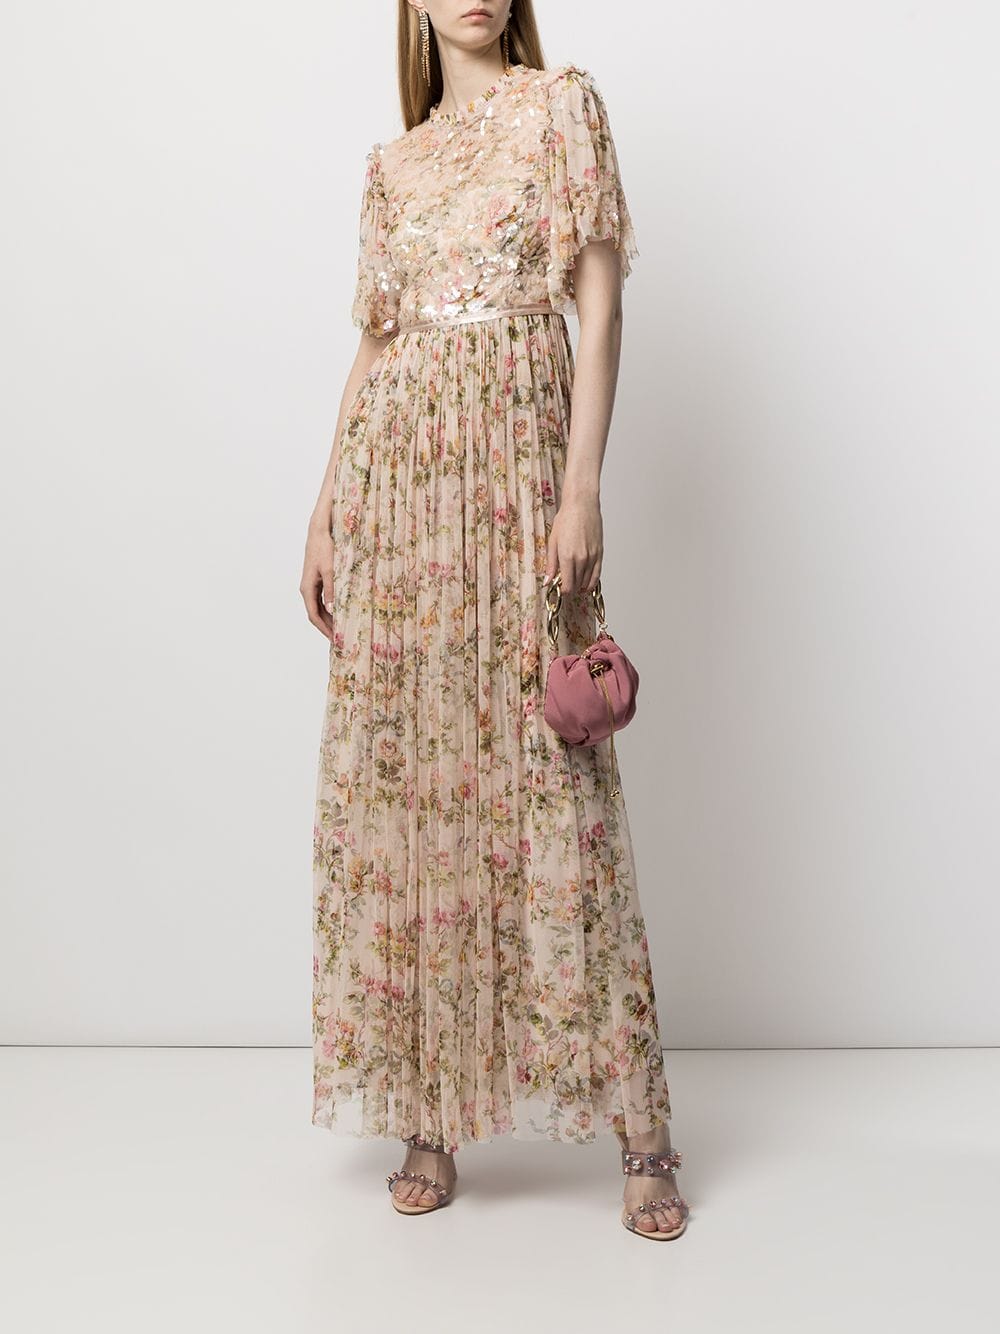 Needle & Thread Sequined Floral Maxi Dress - Farfetch